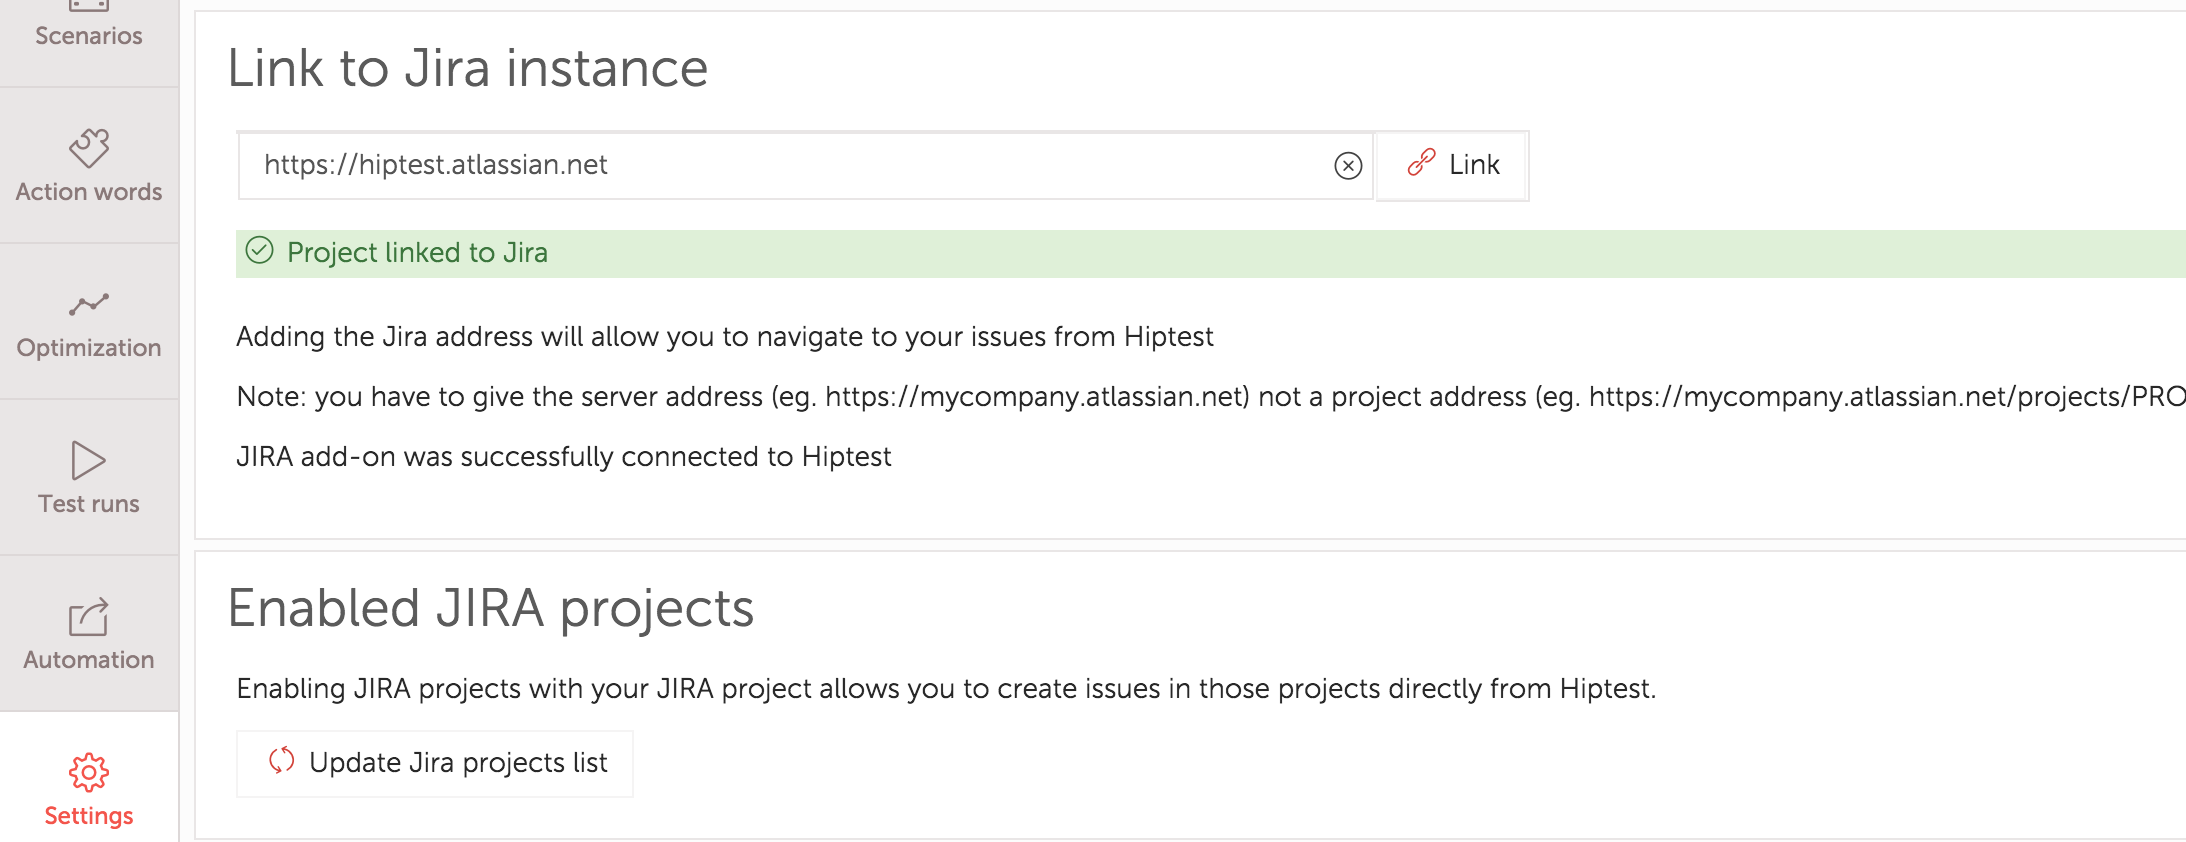 Once Hiptest is linked to Jira, update Jira projects lists